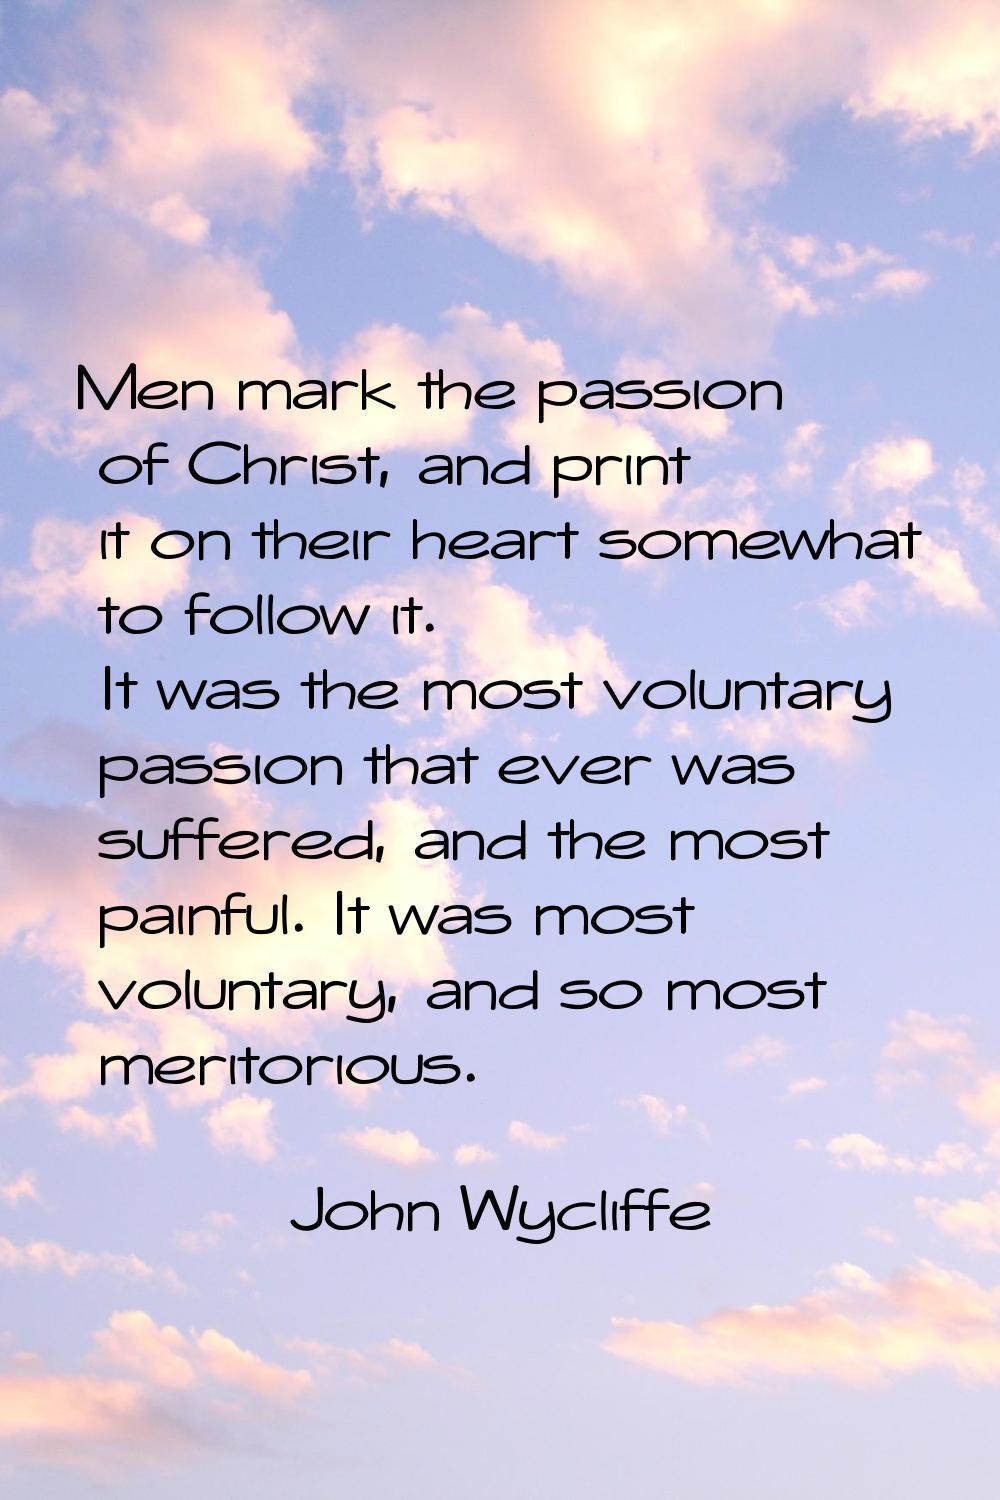 Men mark the passion of Christ, and print it on their heart somewhat to follow it. It was the most 